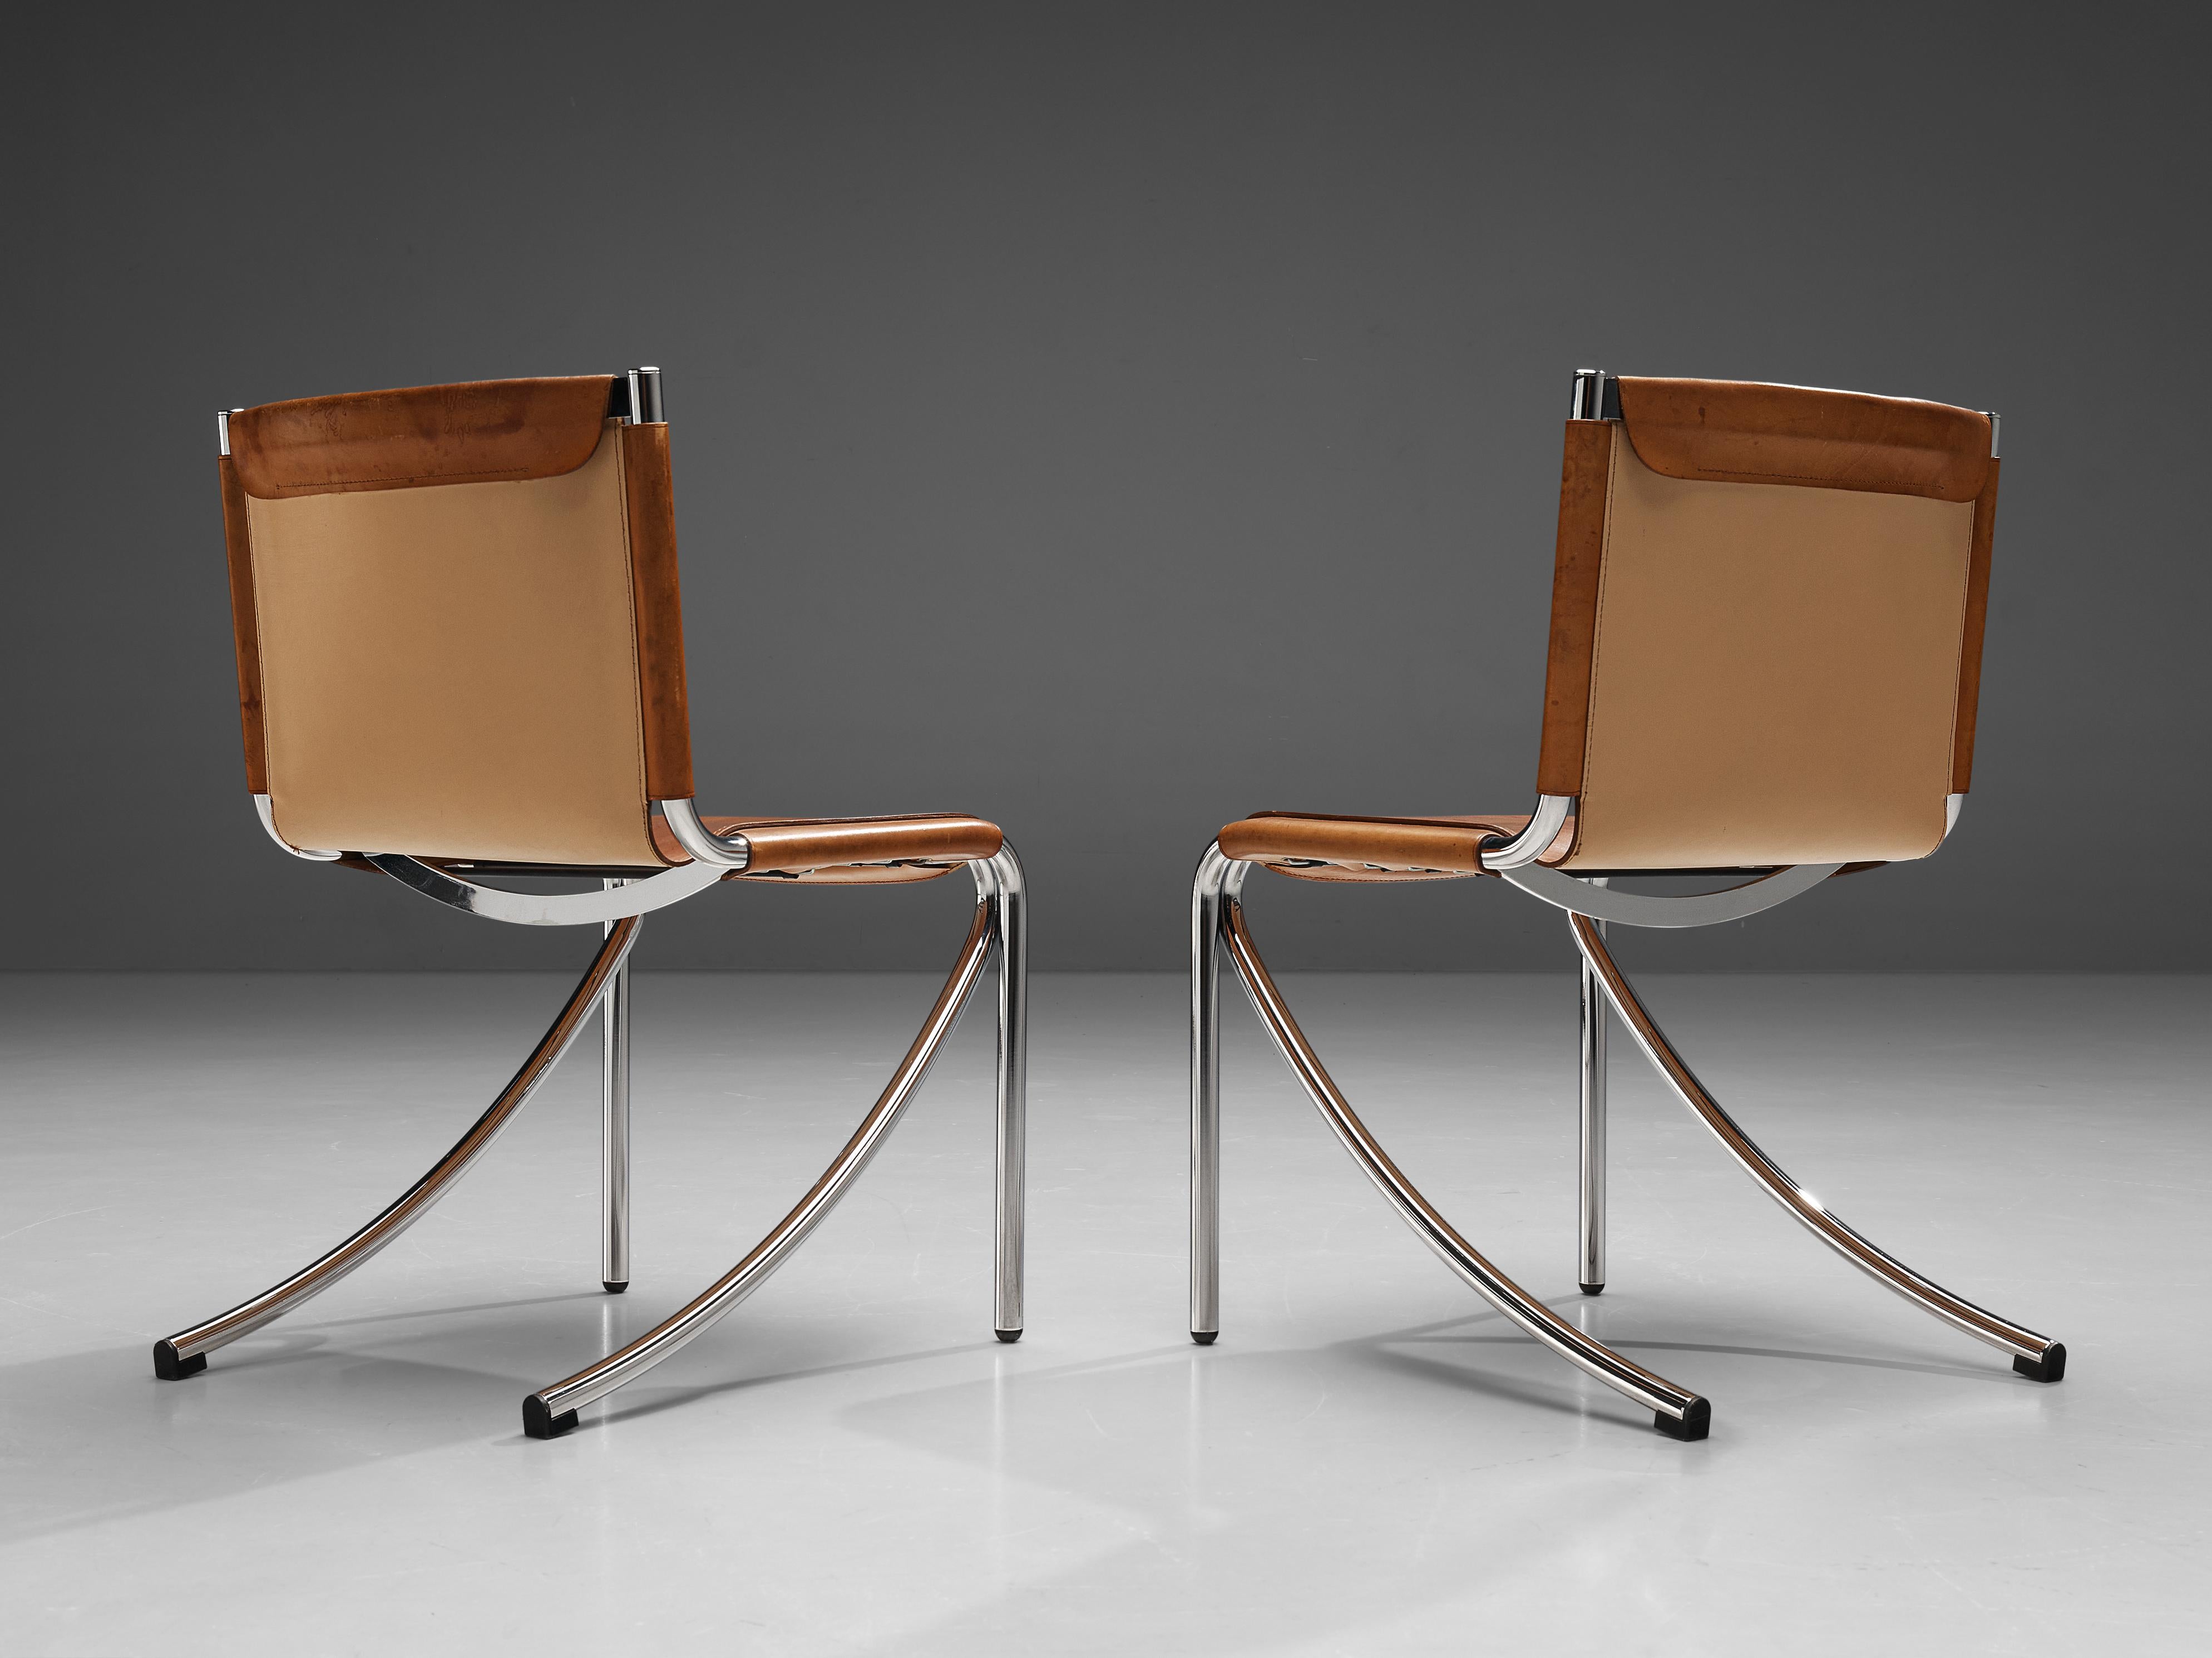 Steel Giotto Stoppino for Acerbis Set of Four Dining Chairs ‘Jot’ in Cognac Leather